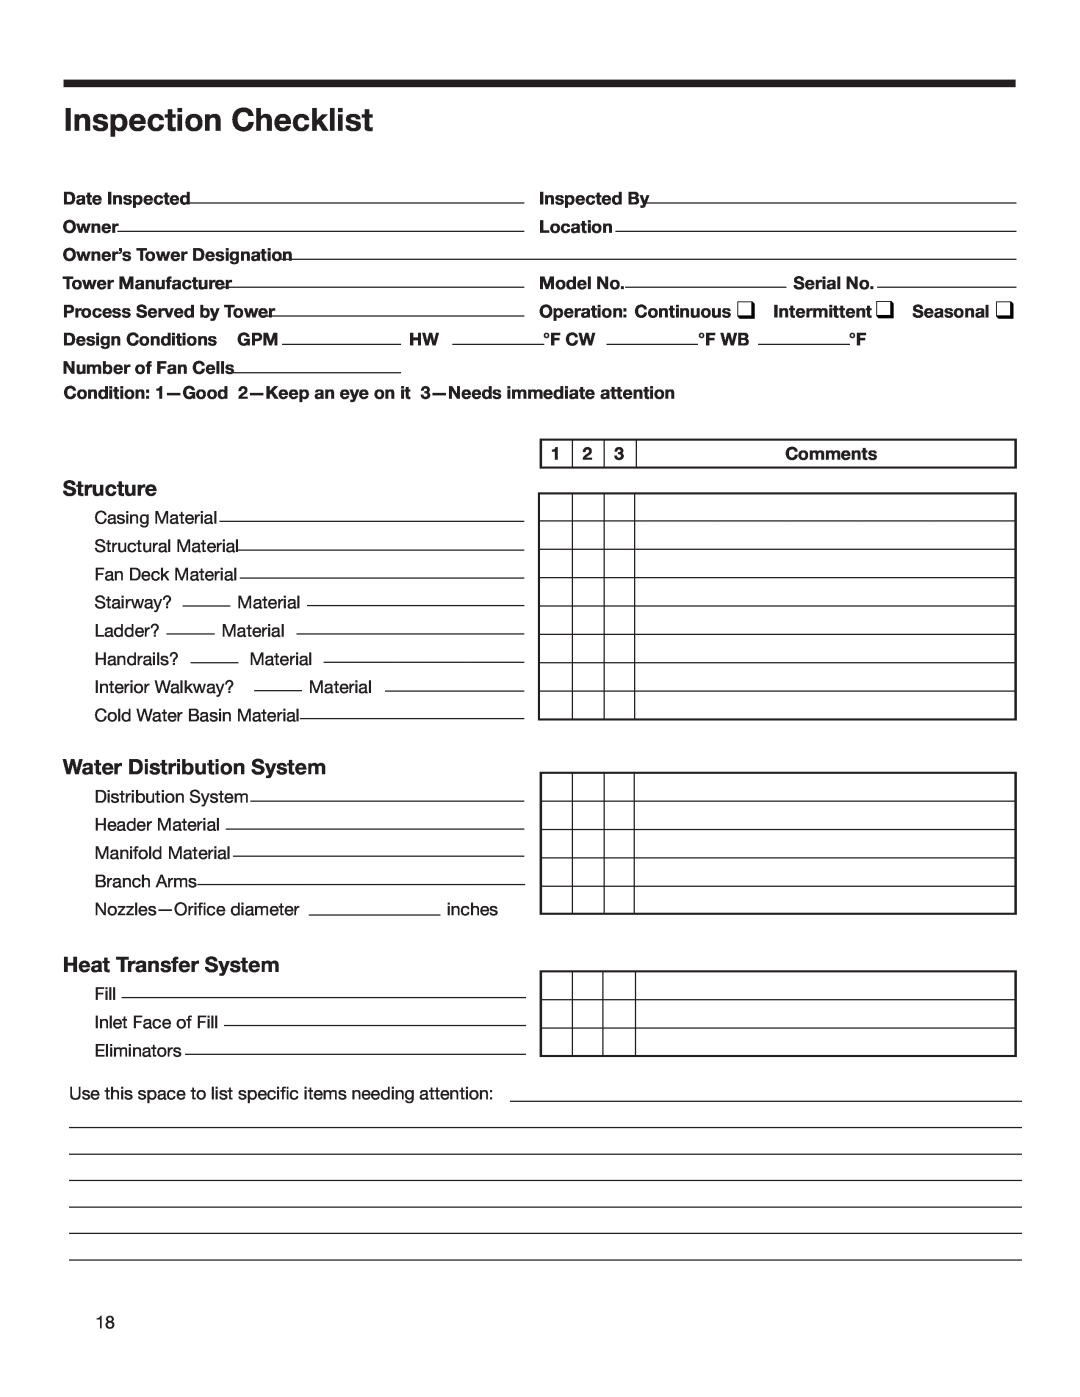 SPX Cooling Technologies F400 user manual Inspection Checklist, Structure, Water Distribution System, Heat Transfer System 